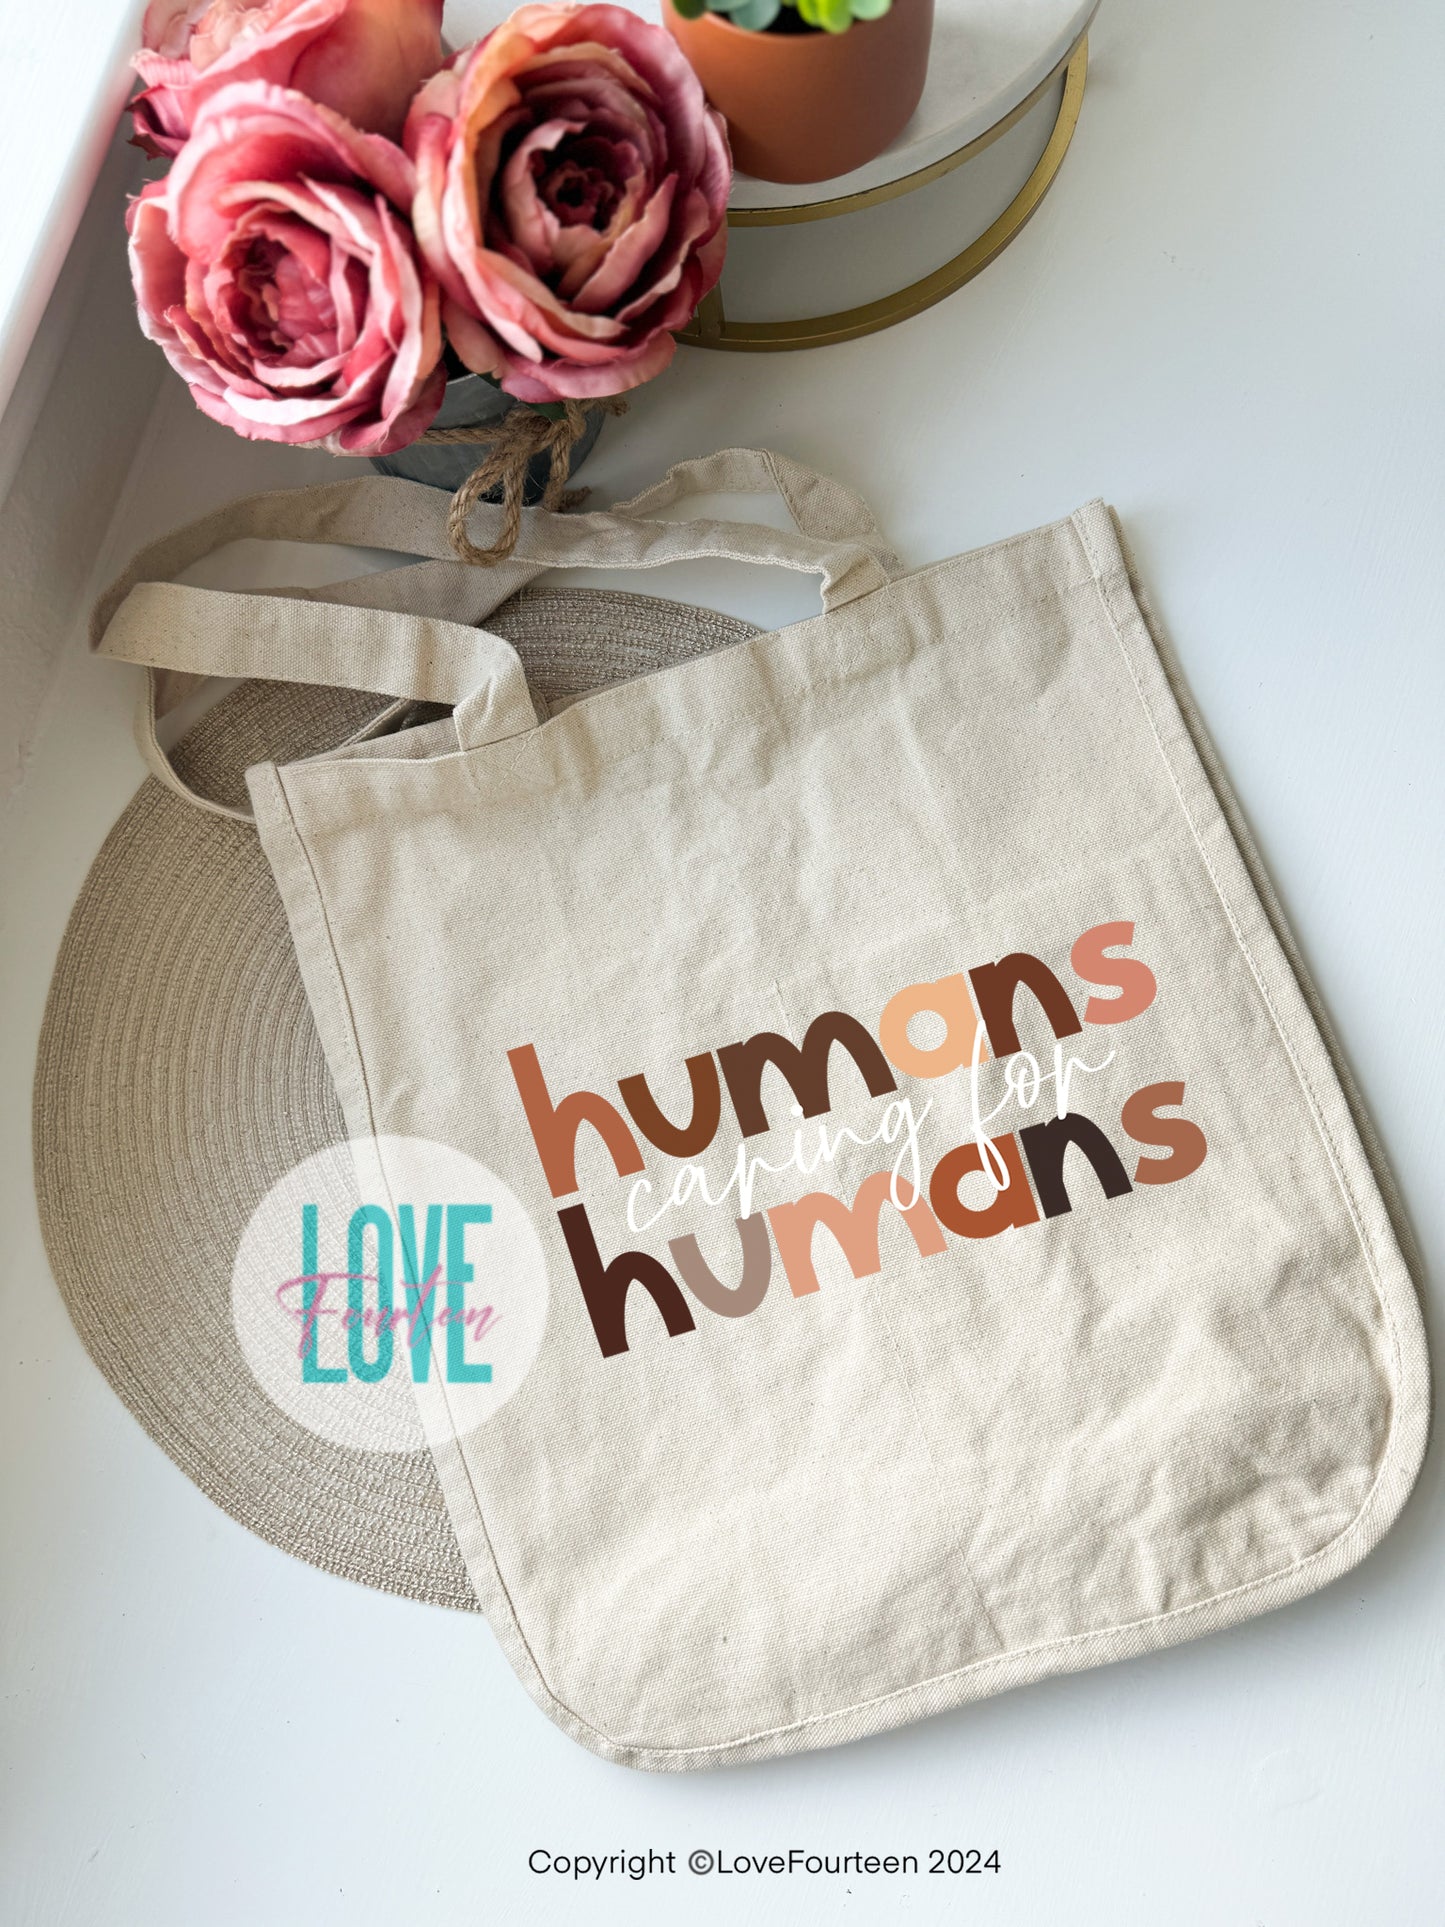 Humans caring for humans Tote Bag